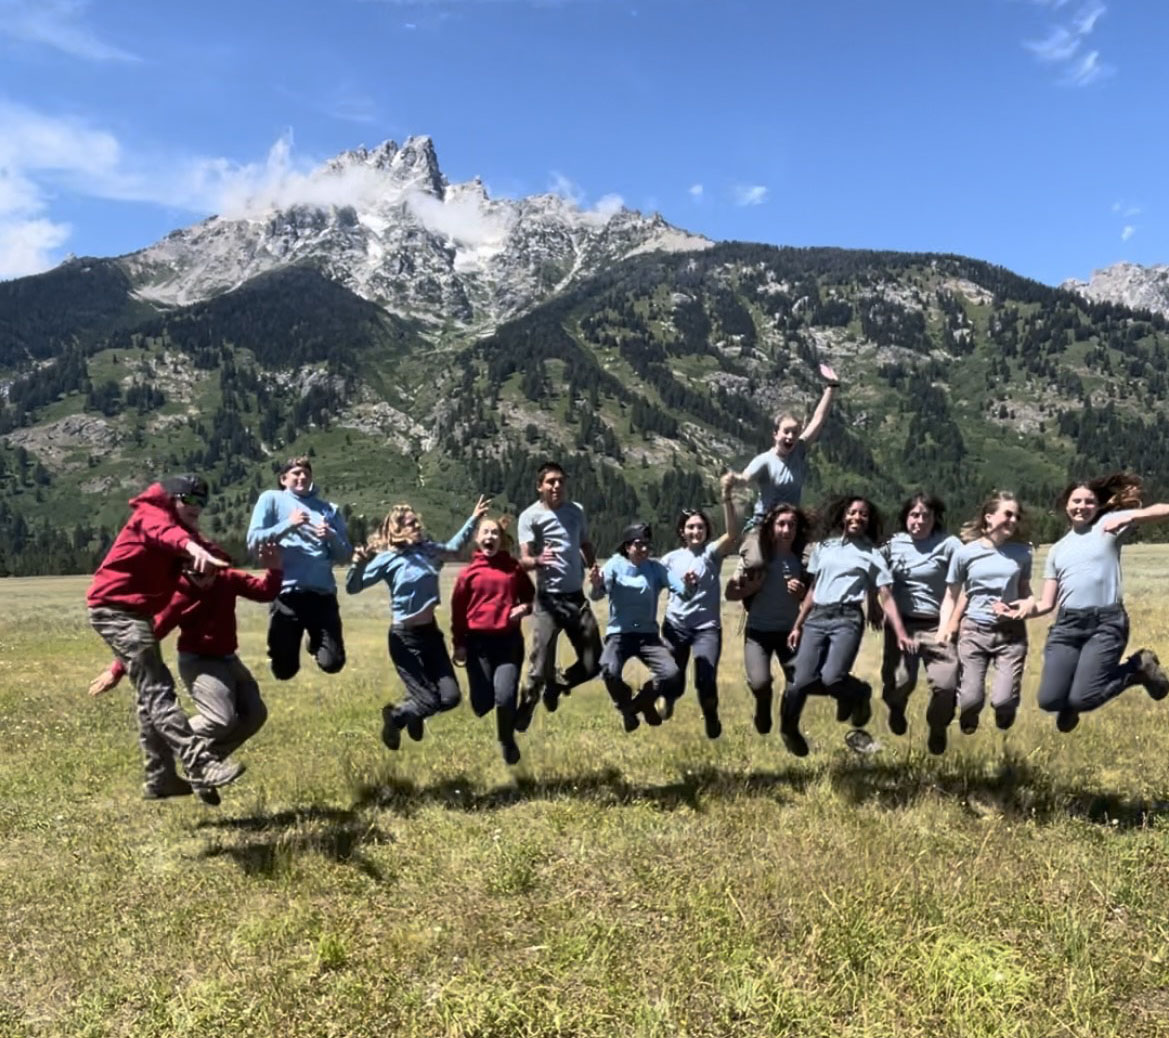 YCP jumps for joy to finish their seventh week in Grand Teton!